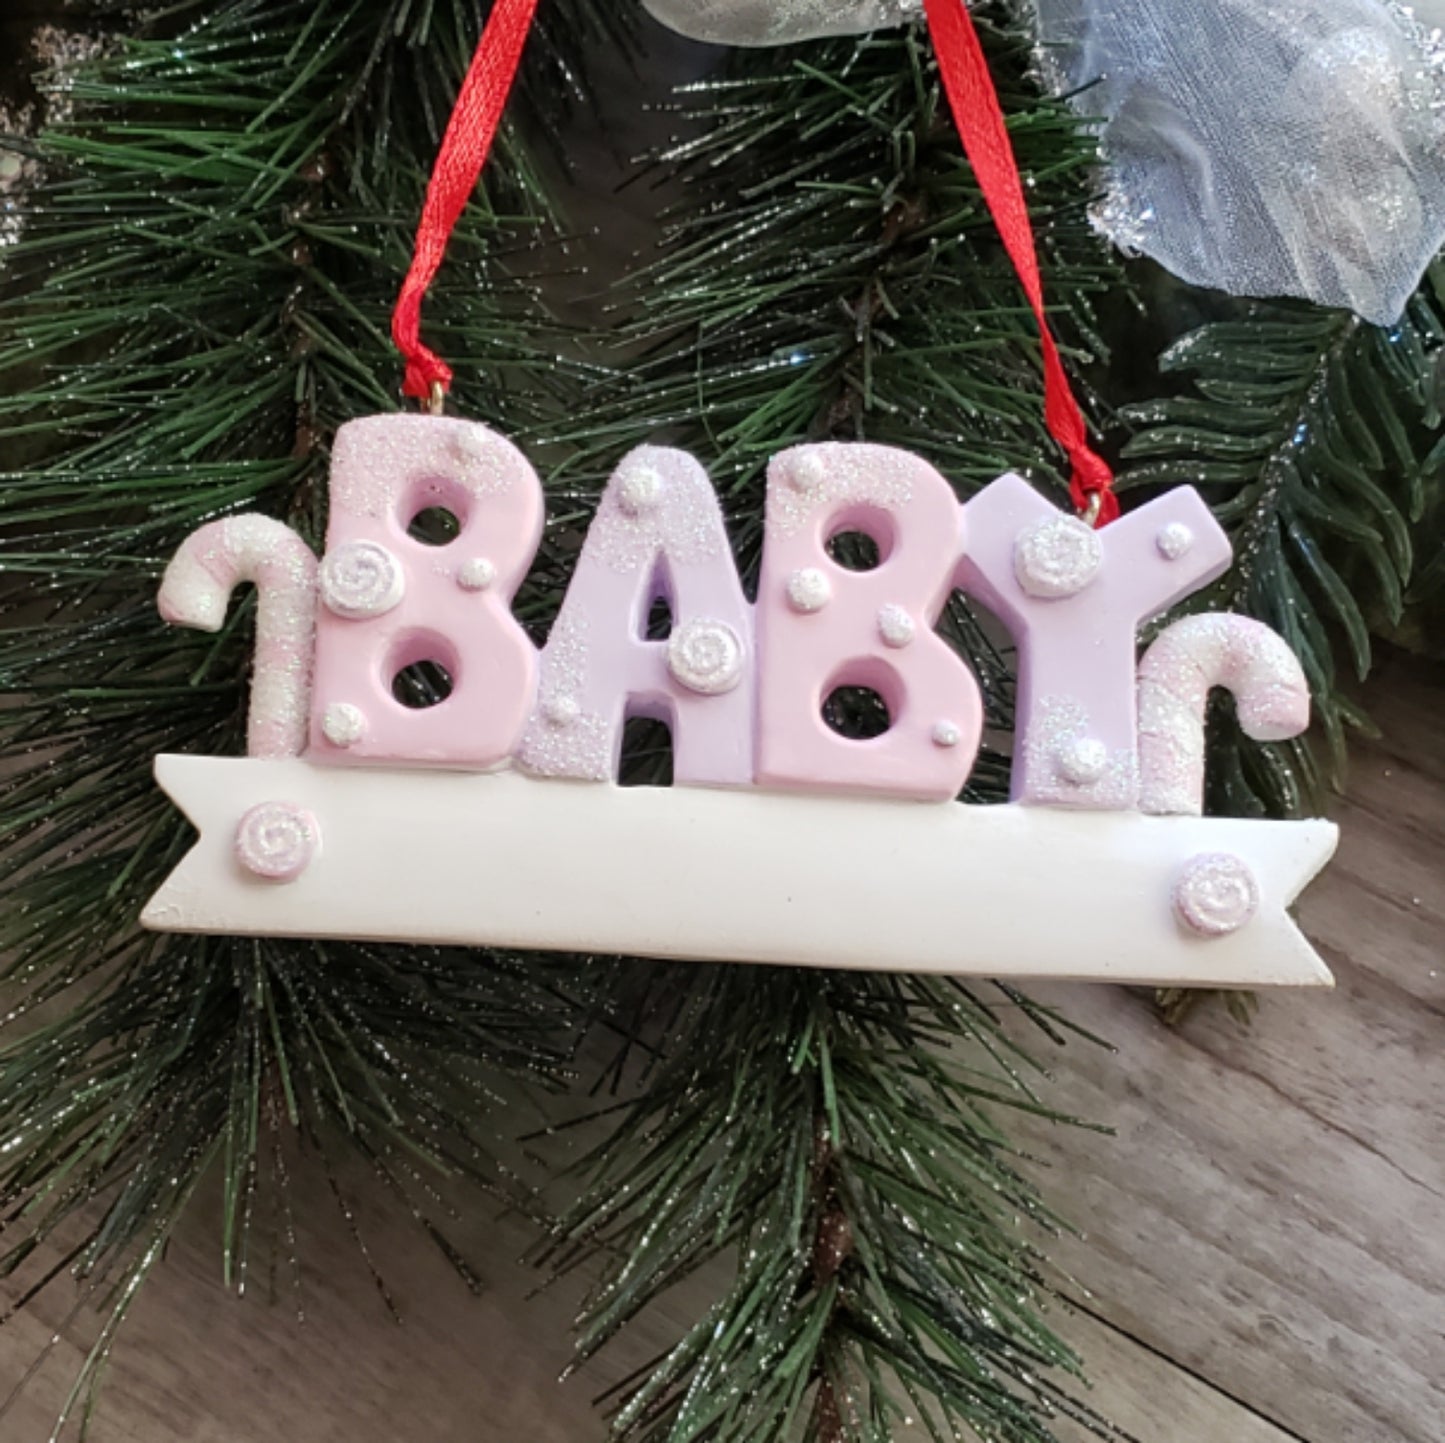 Baby's First "Baby" Christmas Ornament